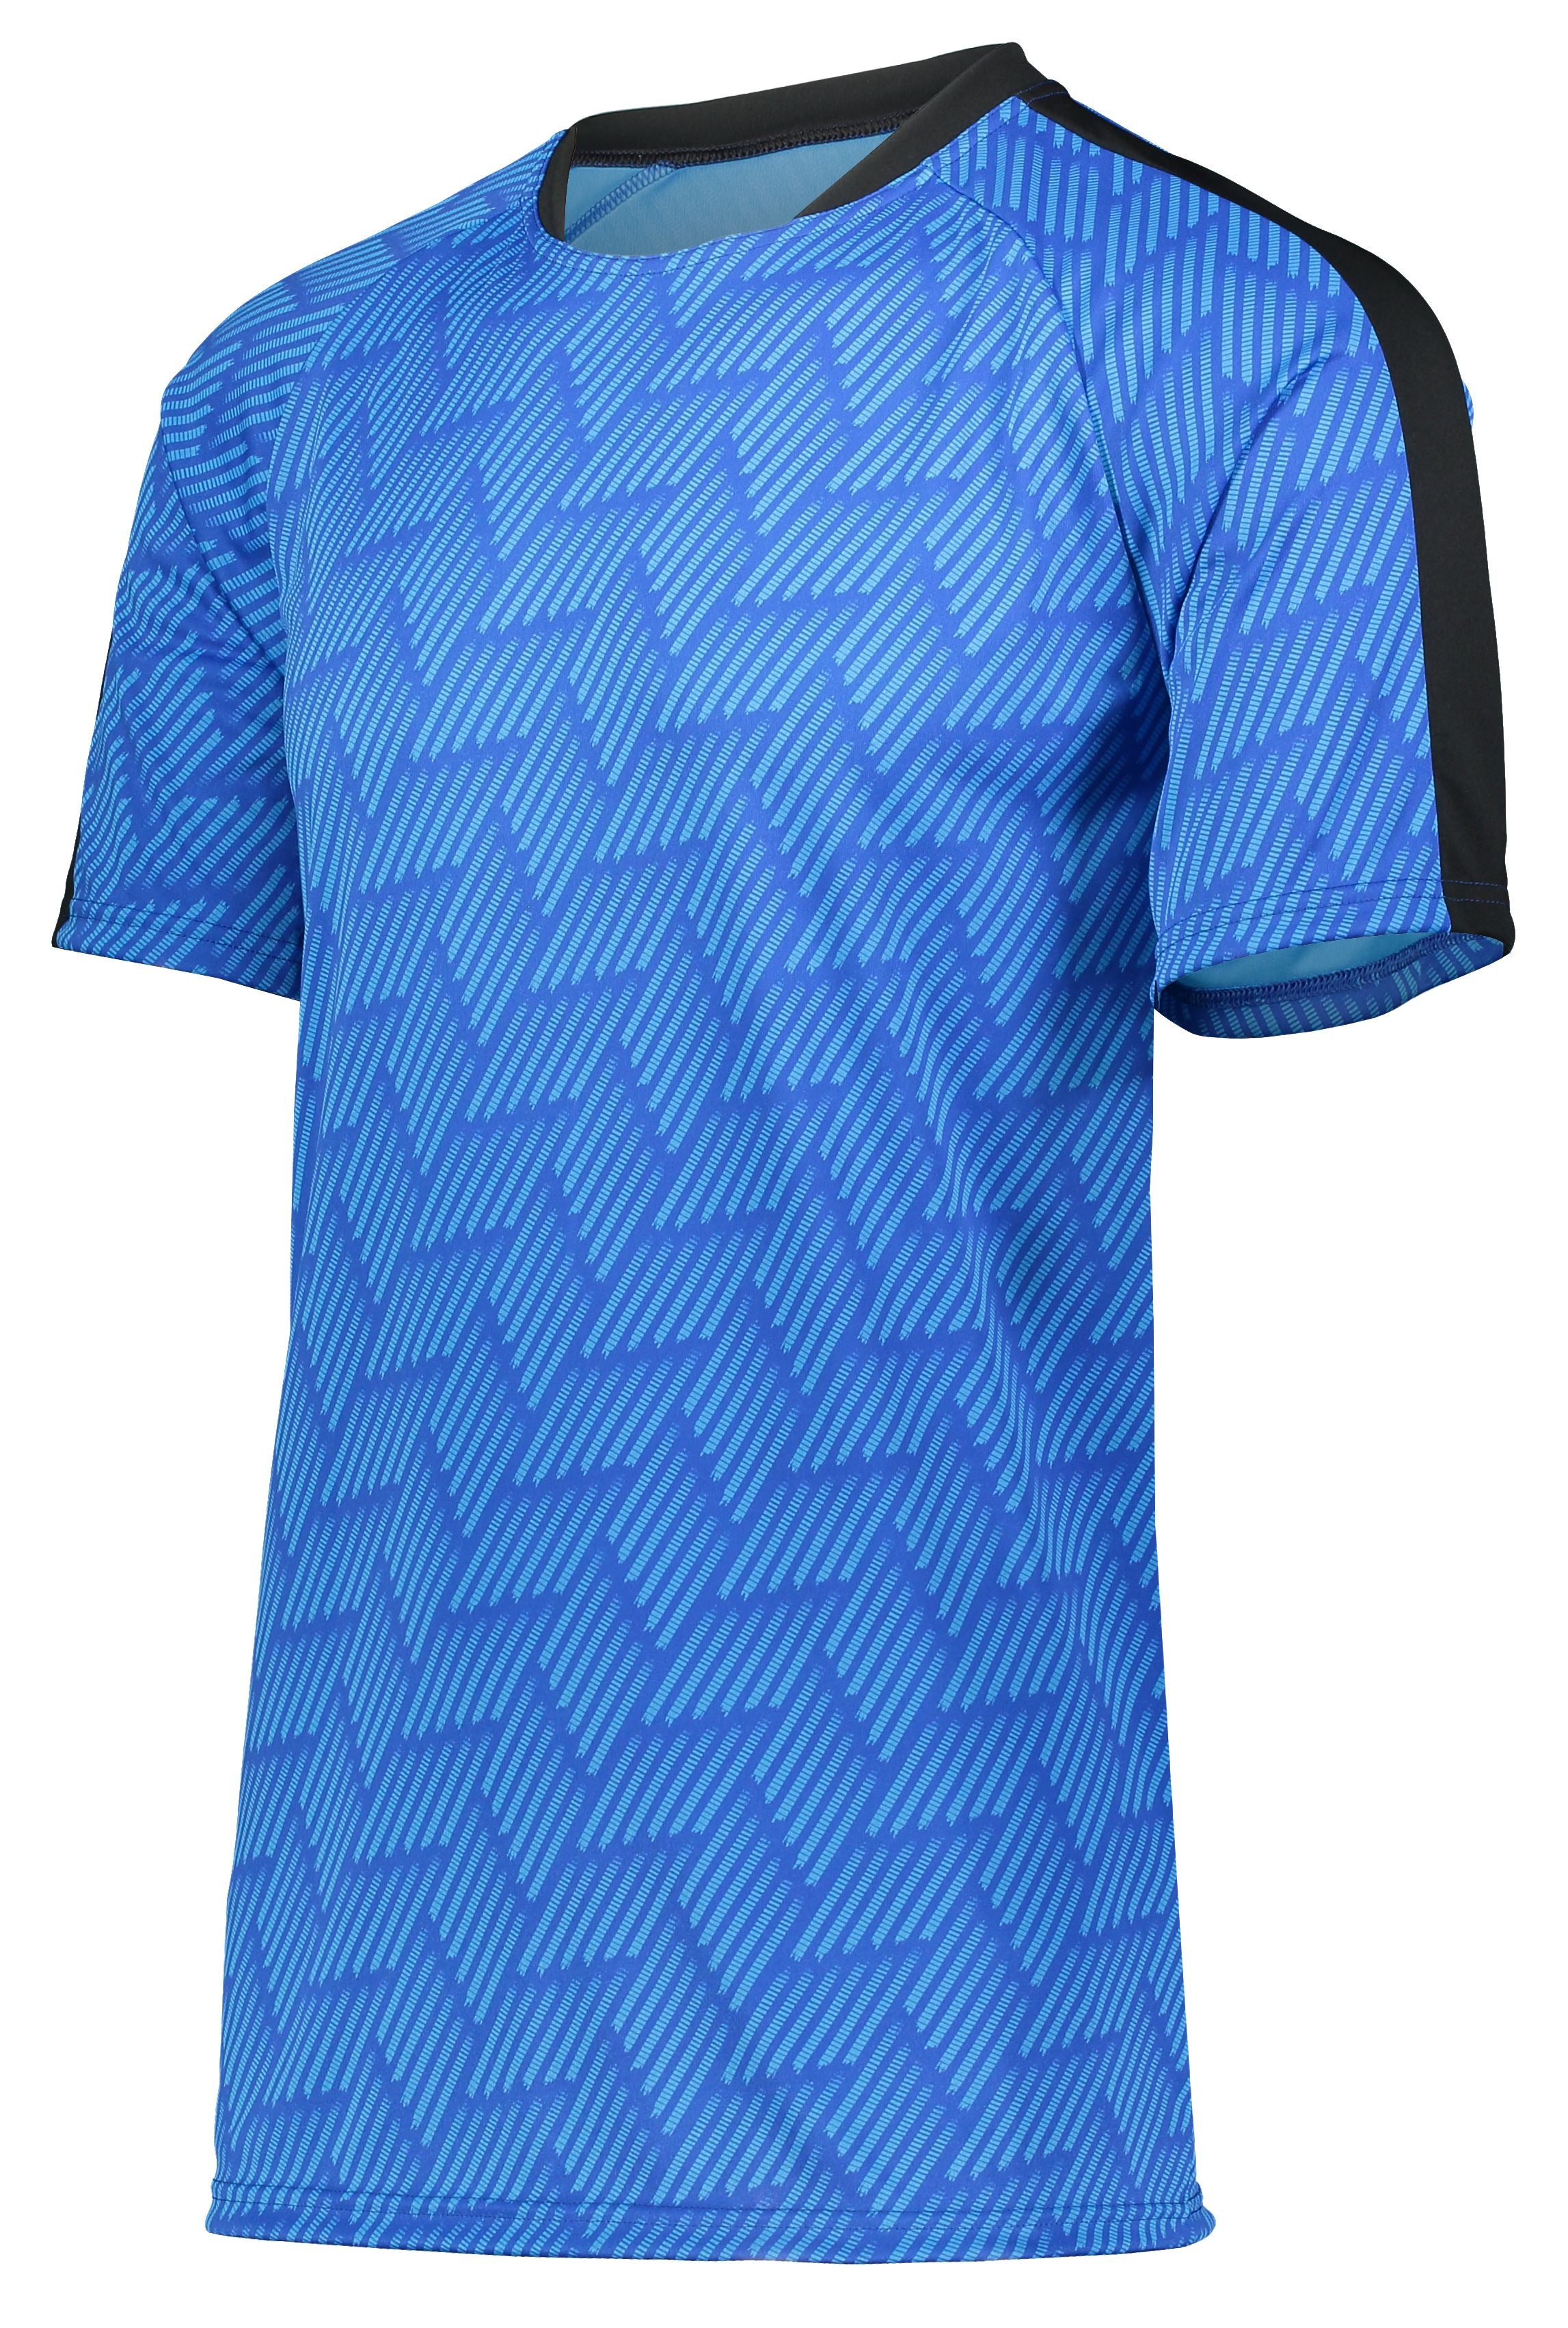 High 5 Hypervolt Jersey in Royal Print/Black  -Part of the Adult, Adult-Jersey, High5-Products, Soccer, Shirts, All-Sports-1 product lines at KanaleyCreations.com